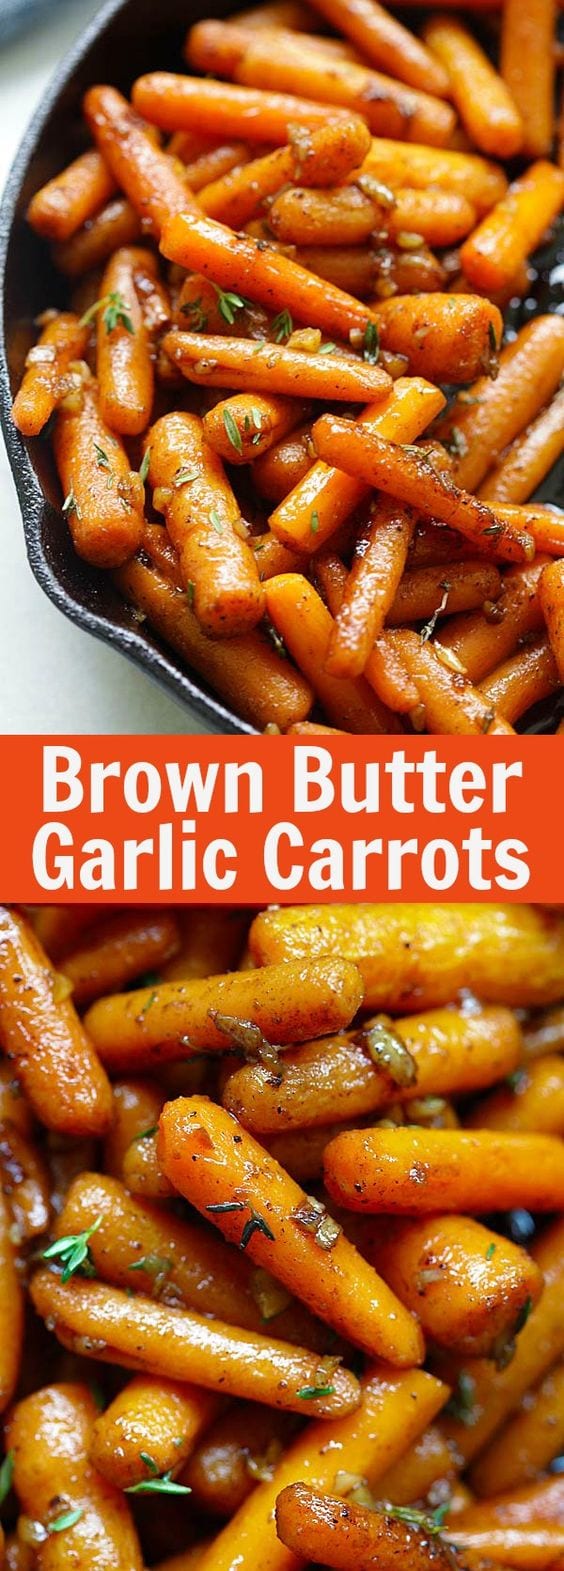 Brown Butter Garlic Honey Roasted Carrots – the best roasted carrots ever with lots of garlic, brown butter and honey. SO good | rasamalaysia.com